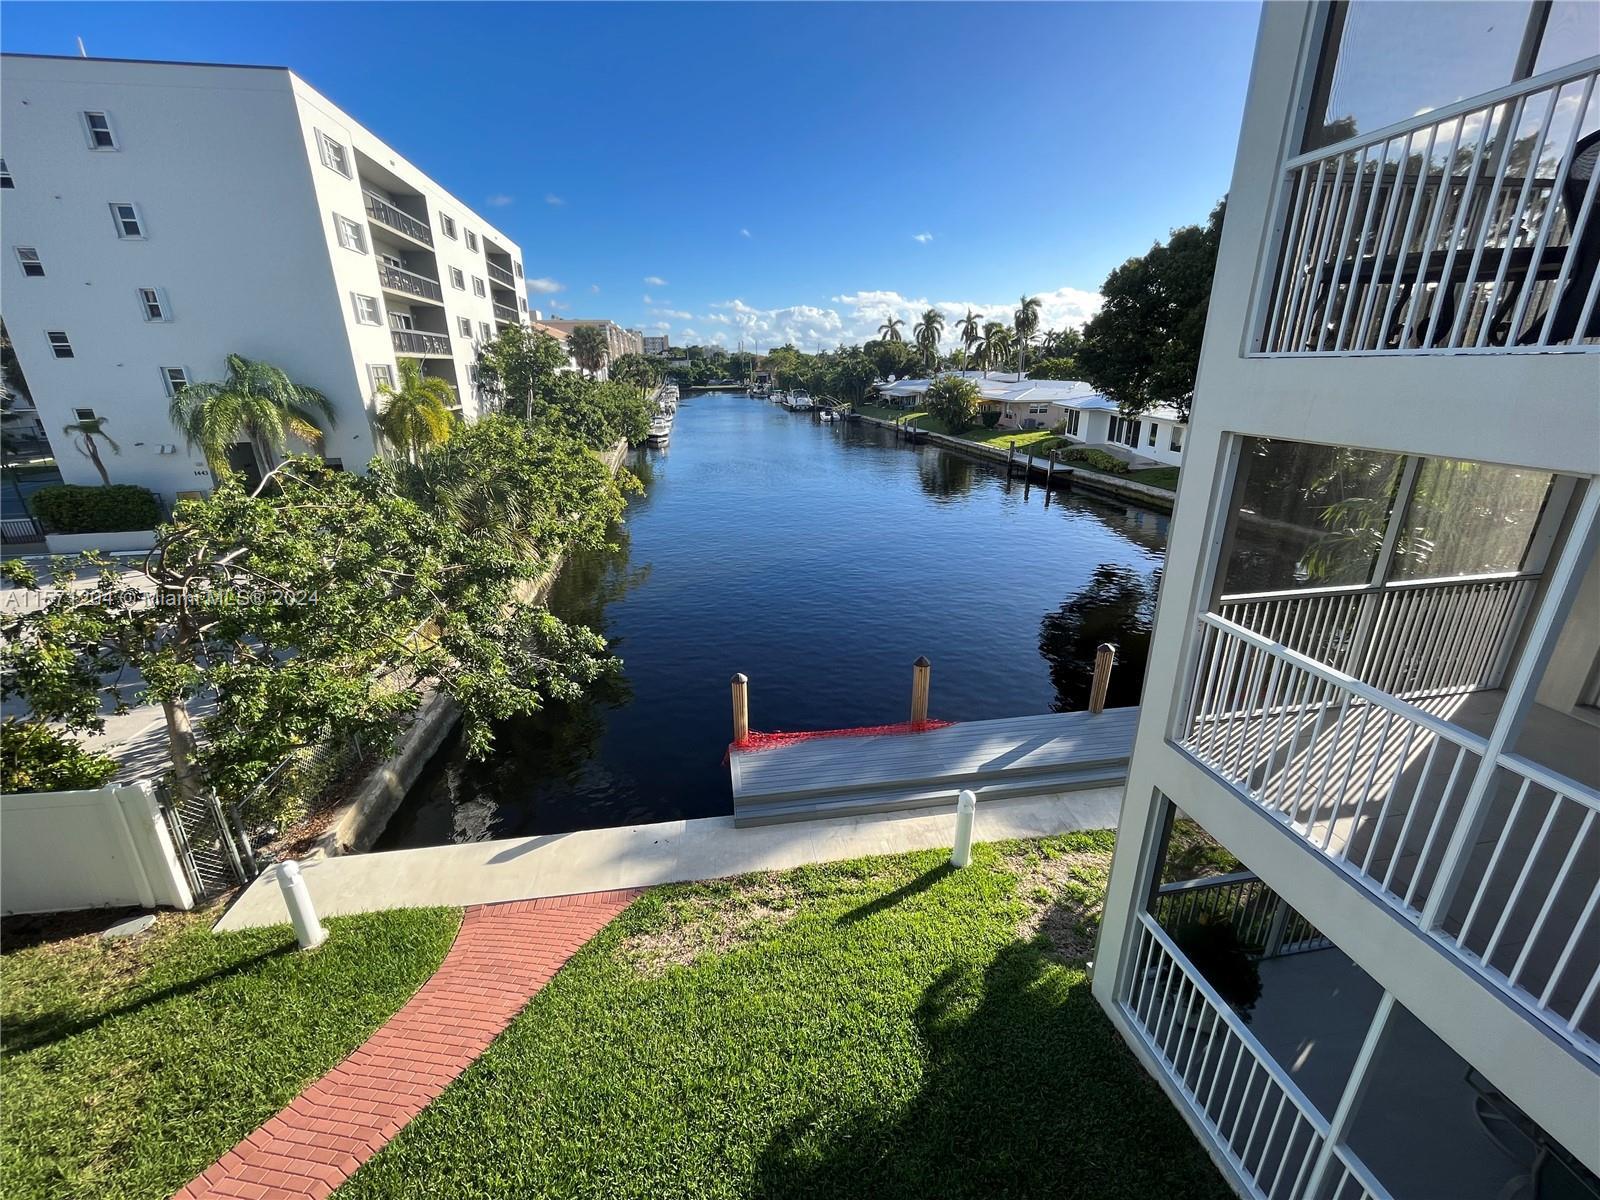 Photo of 1439 S Ocean Blvd #316 in Lauderdale By The Sea, FL